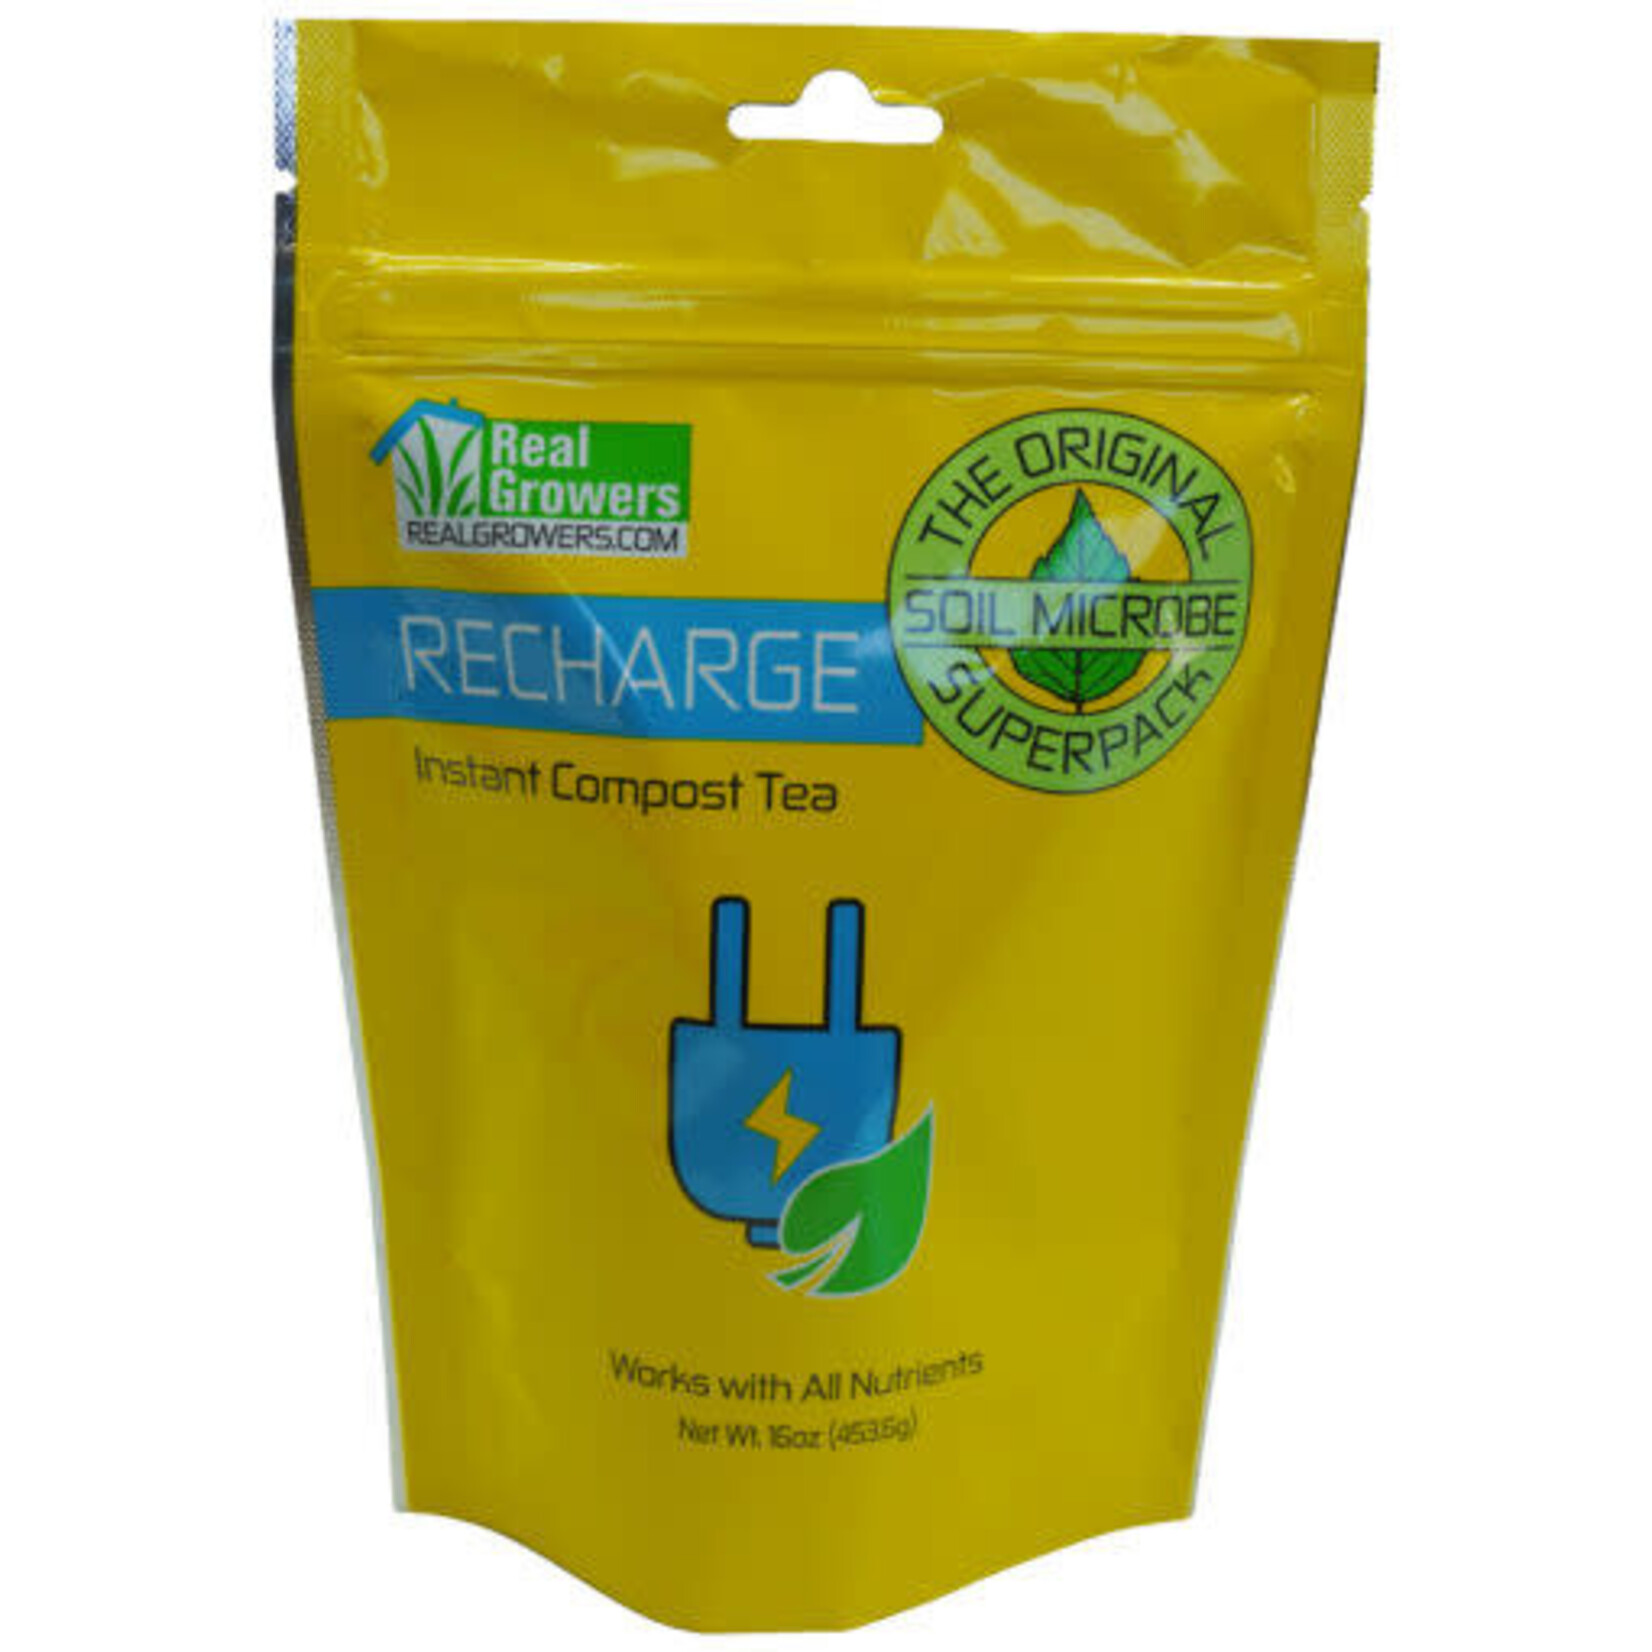 Real Growers Real Growers Recharge Instant Compost Tea 16oz